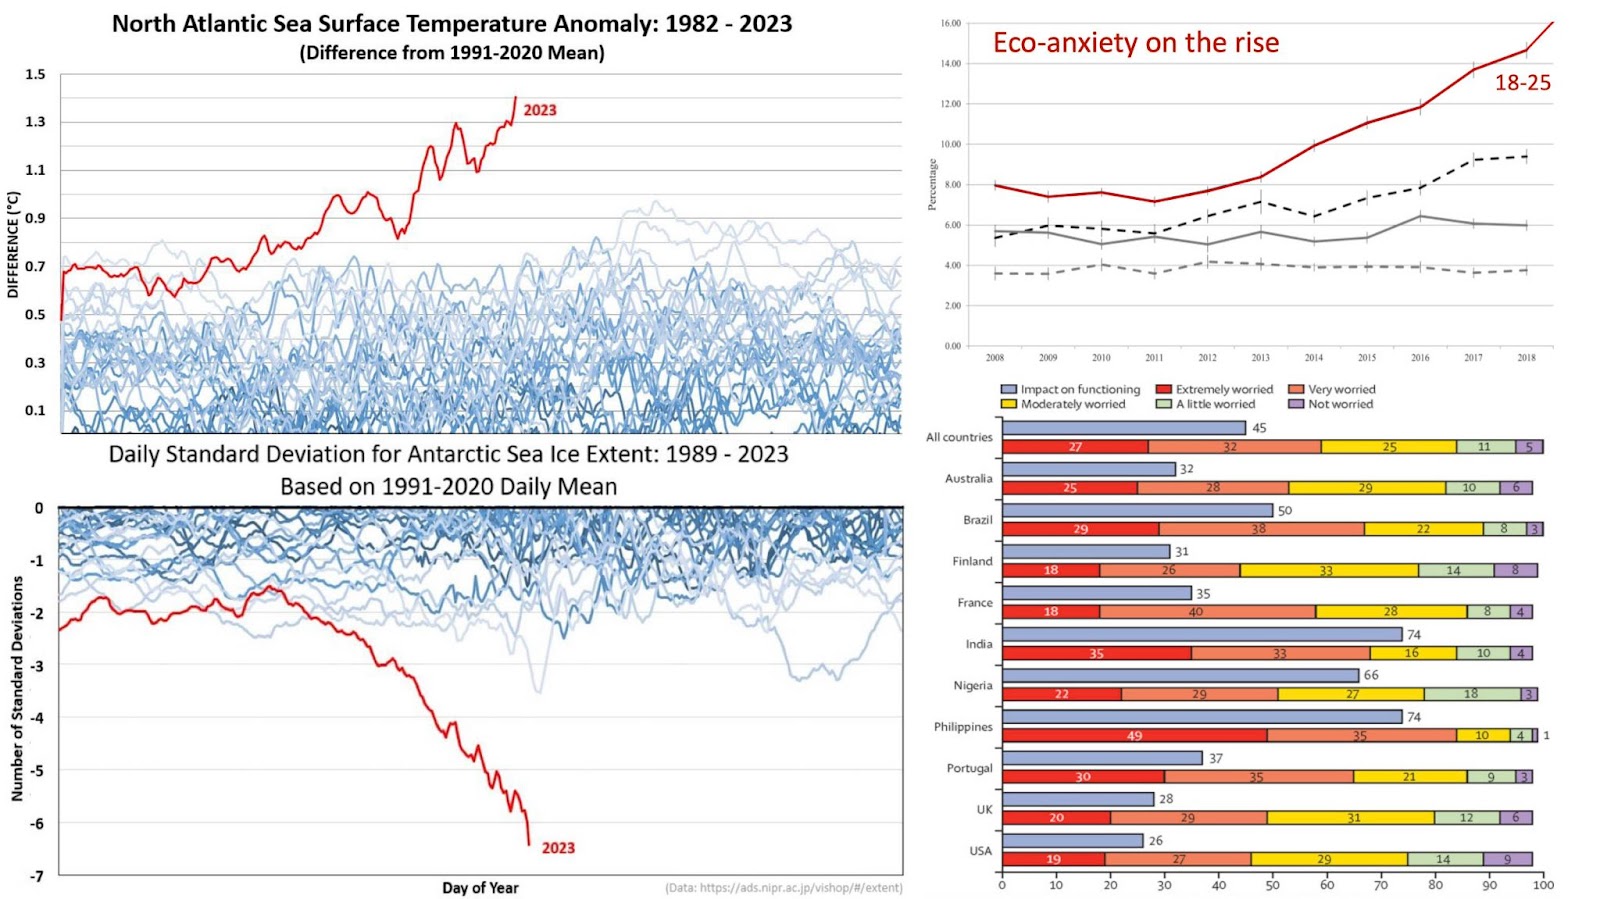 Dramatic increase in climate impacts, for example the dramatic spike in ocean temperatures (top left) or the collapse of polar ice (lower left), coincide with a rise in reported eco-anxiety symptoms, especially amongst younger people (top right). A recent study found that in countries hardest hit by climate change like the Philippines and India, as much as three-quarters of young people feel somewhat incapacitated by climate anxiety. Even in Global North countries like the US and UK, more than one-quarter of young people feel incapacitated.